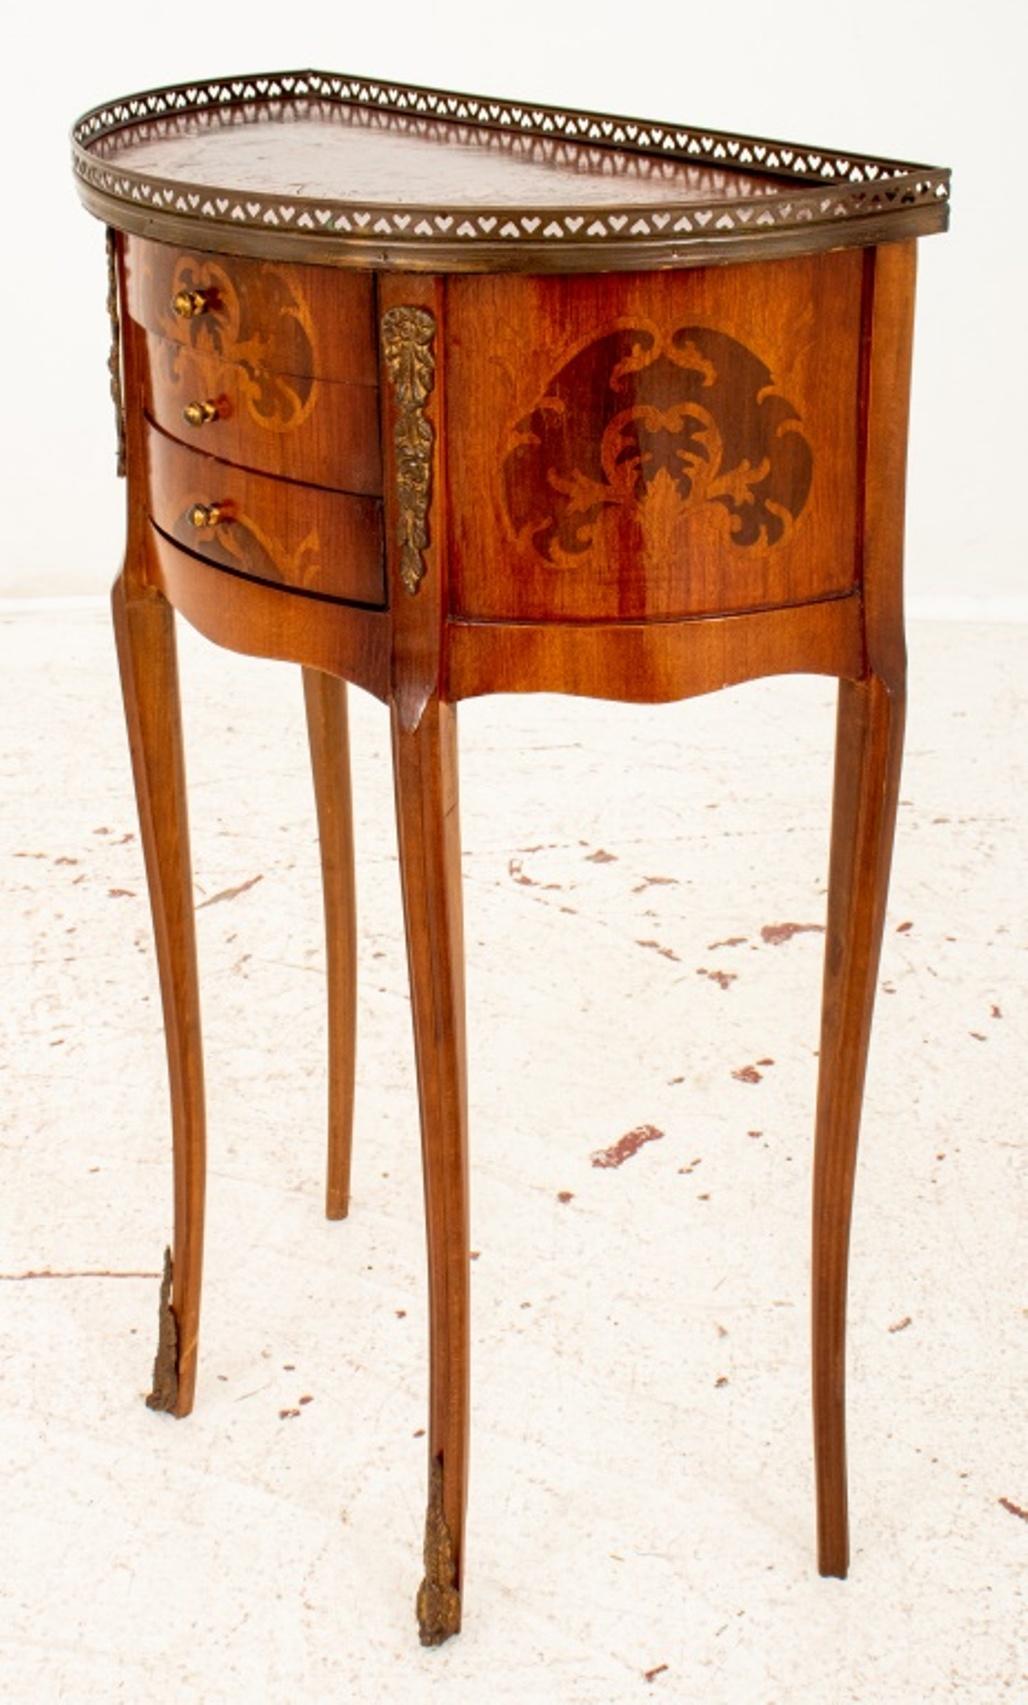 Louis XV style demilune marquetry nightstand, the giltmetal reticulated galleried top with floral marquetry designs above two drawers, on elongated cabriole legs. 

Dimensions: 29.5